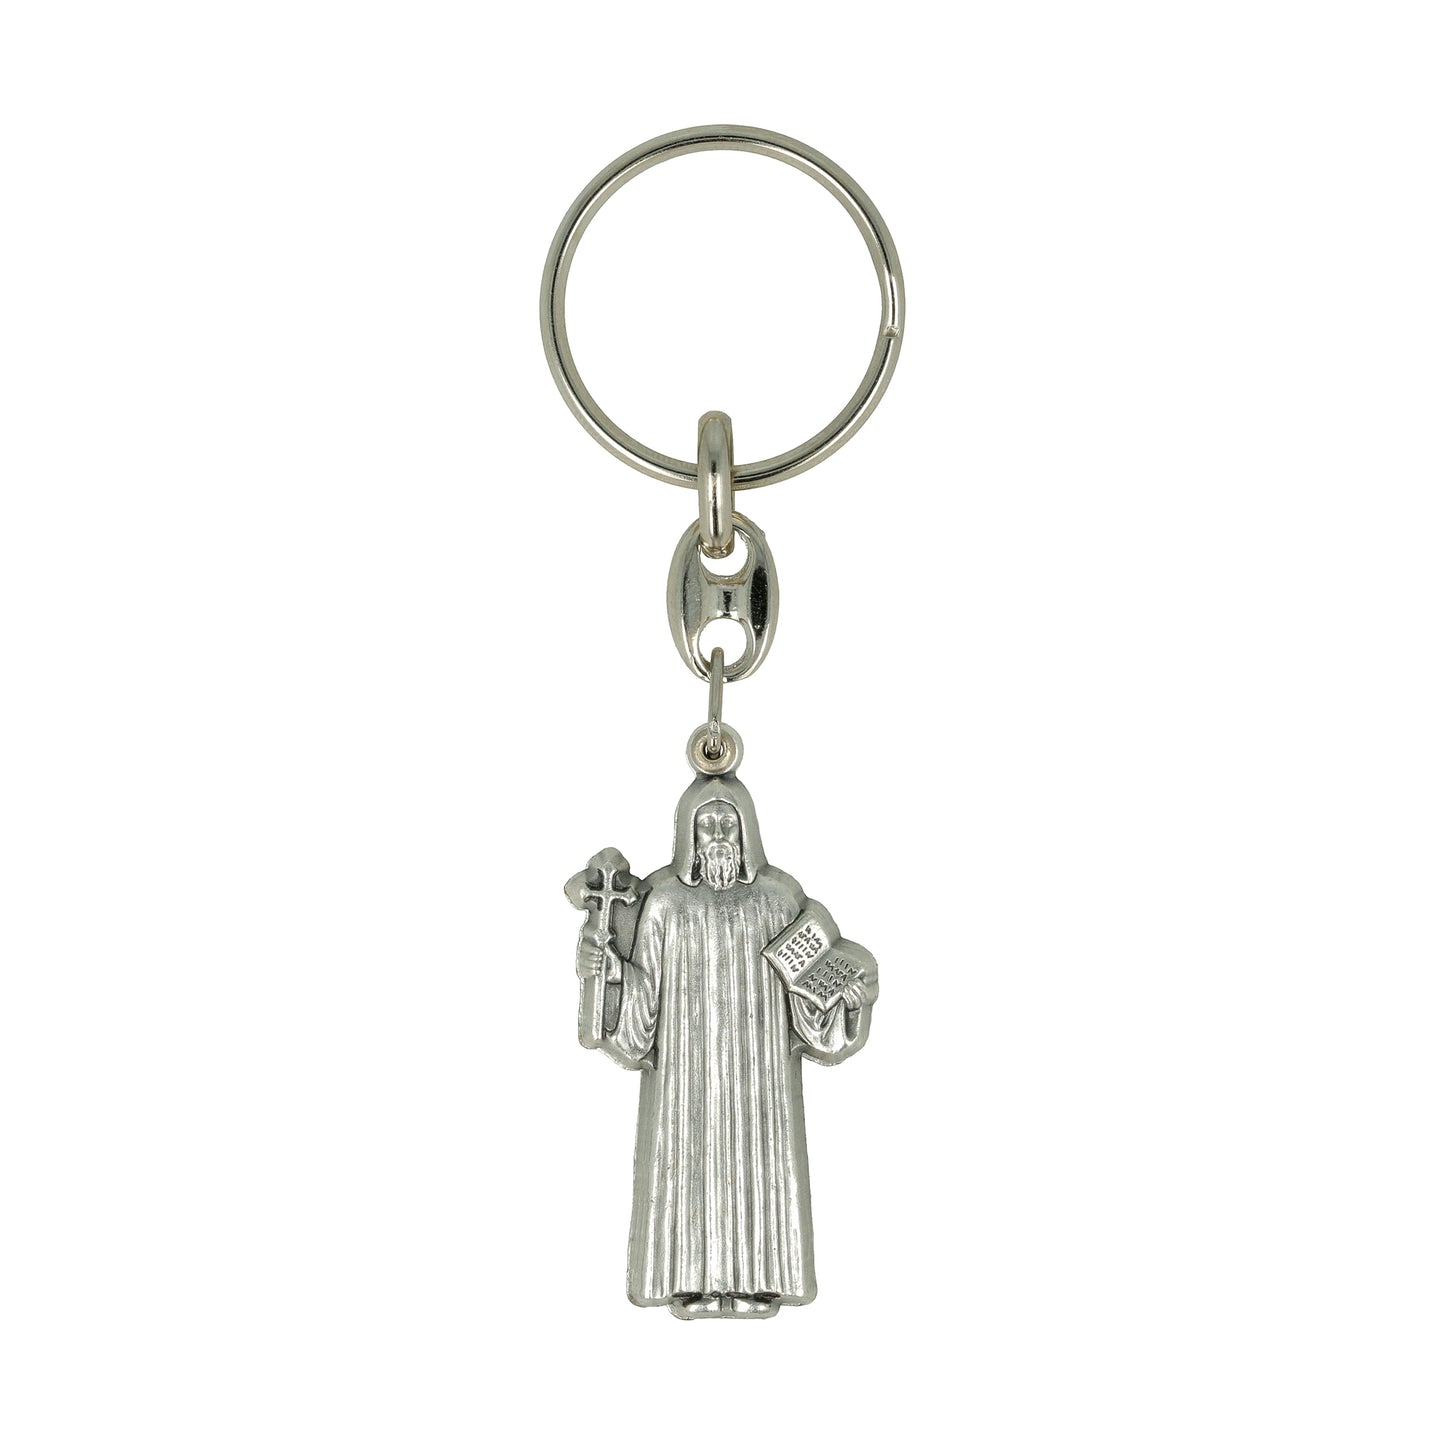 Keychain Saint Benedict Silhouette Symbol. Souvenirs from Italy